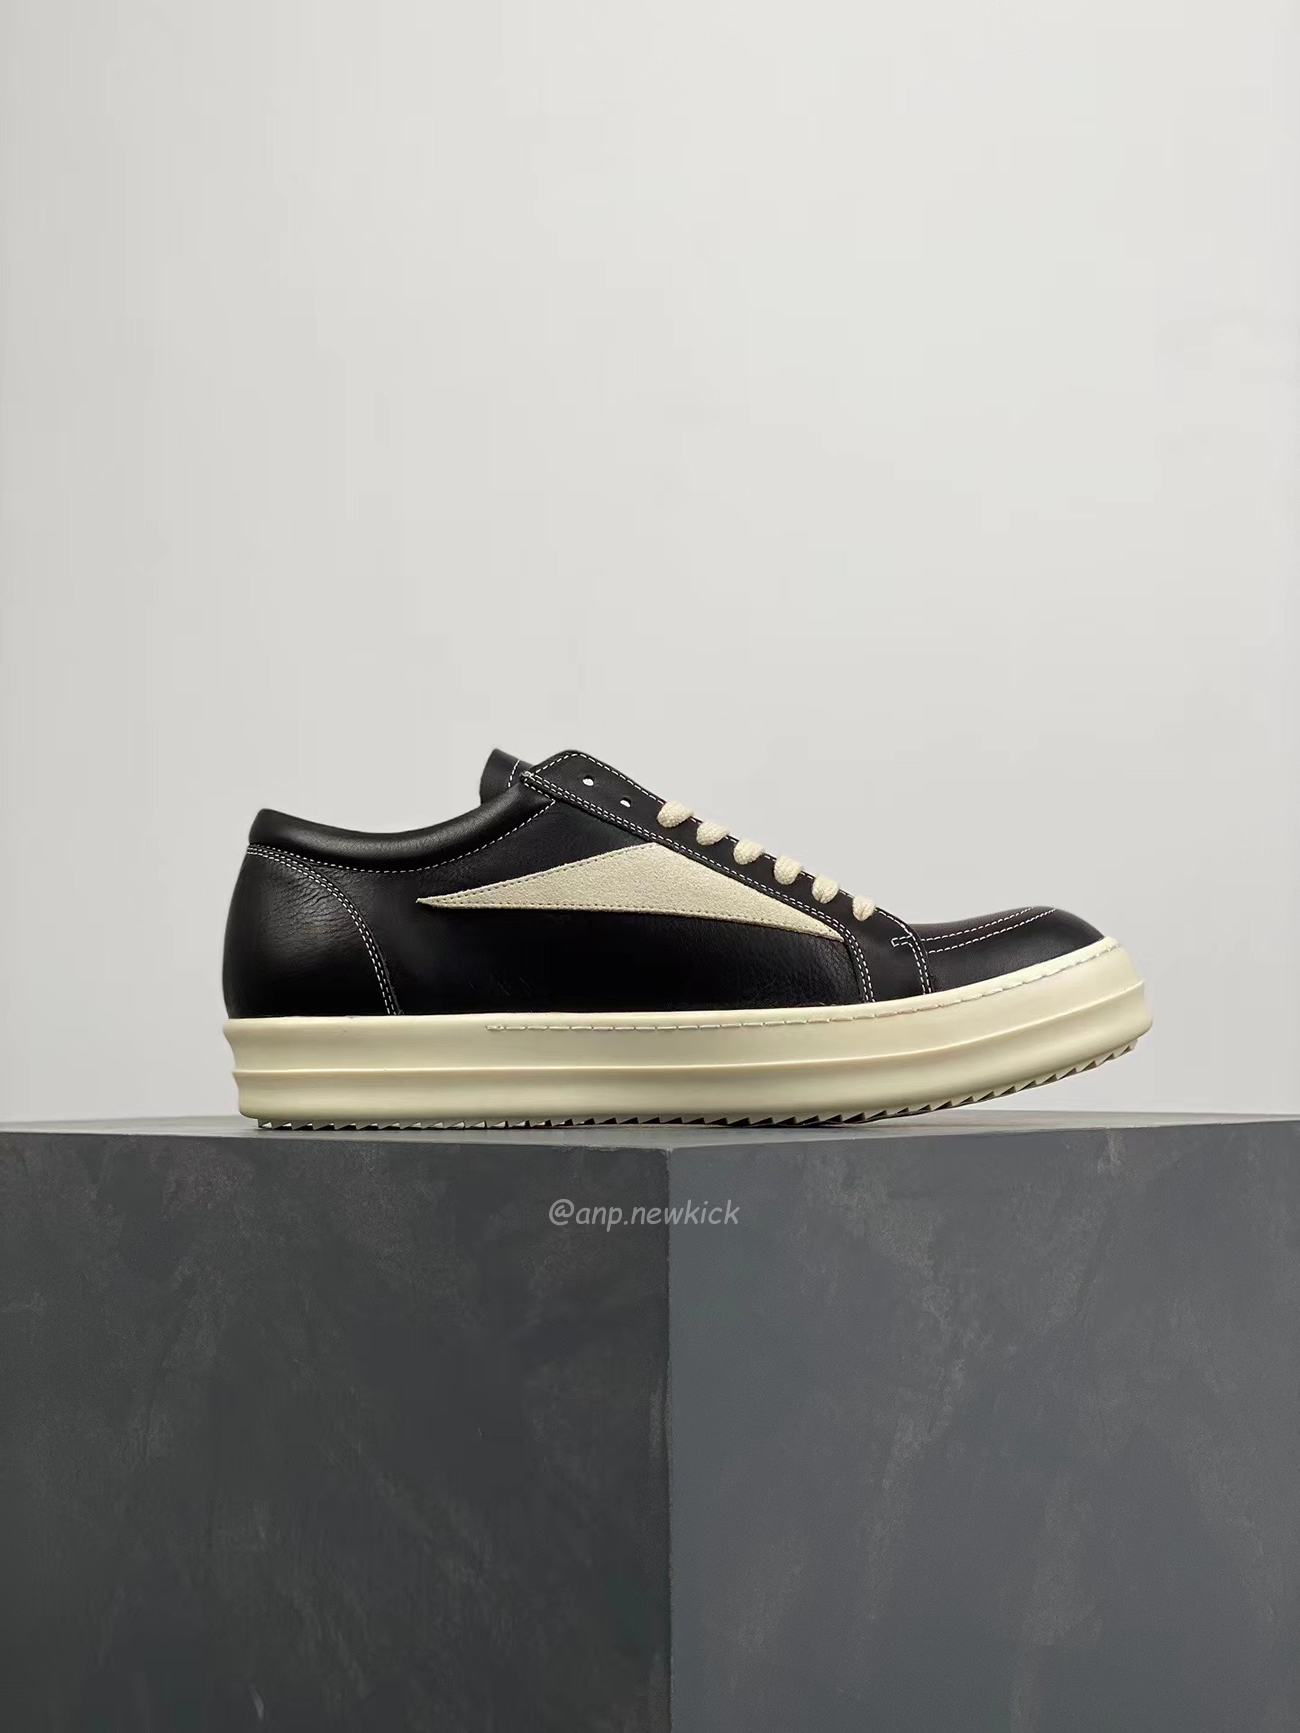 Rick Owens Leather Low Top Vintage Sneakers Suede Canvas Black Taupe Grey Faded Pnk Pearl Milk Dark Dust (28) - newkick.org